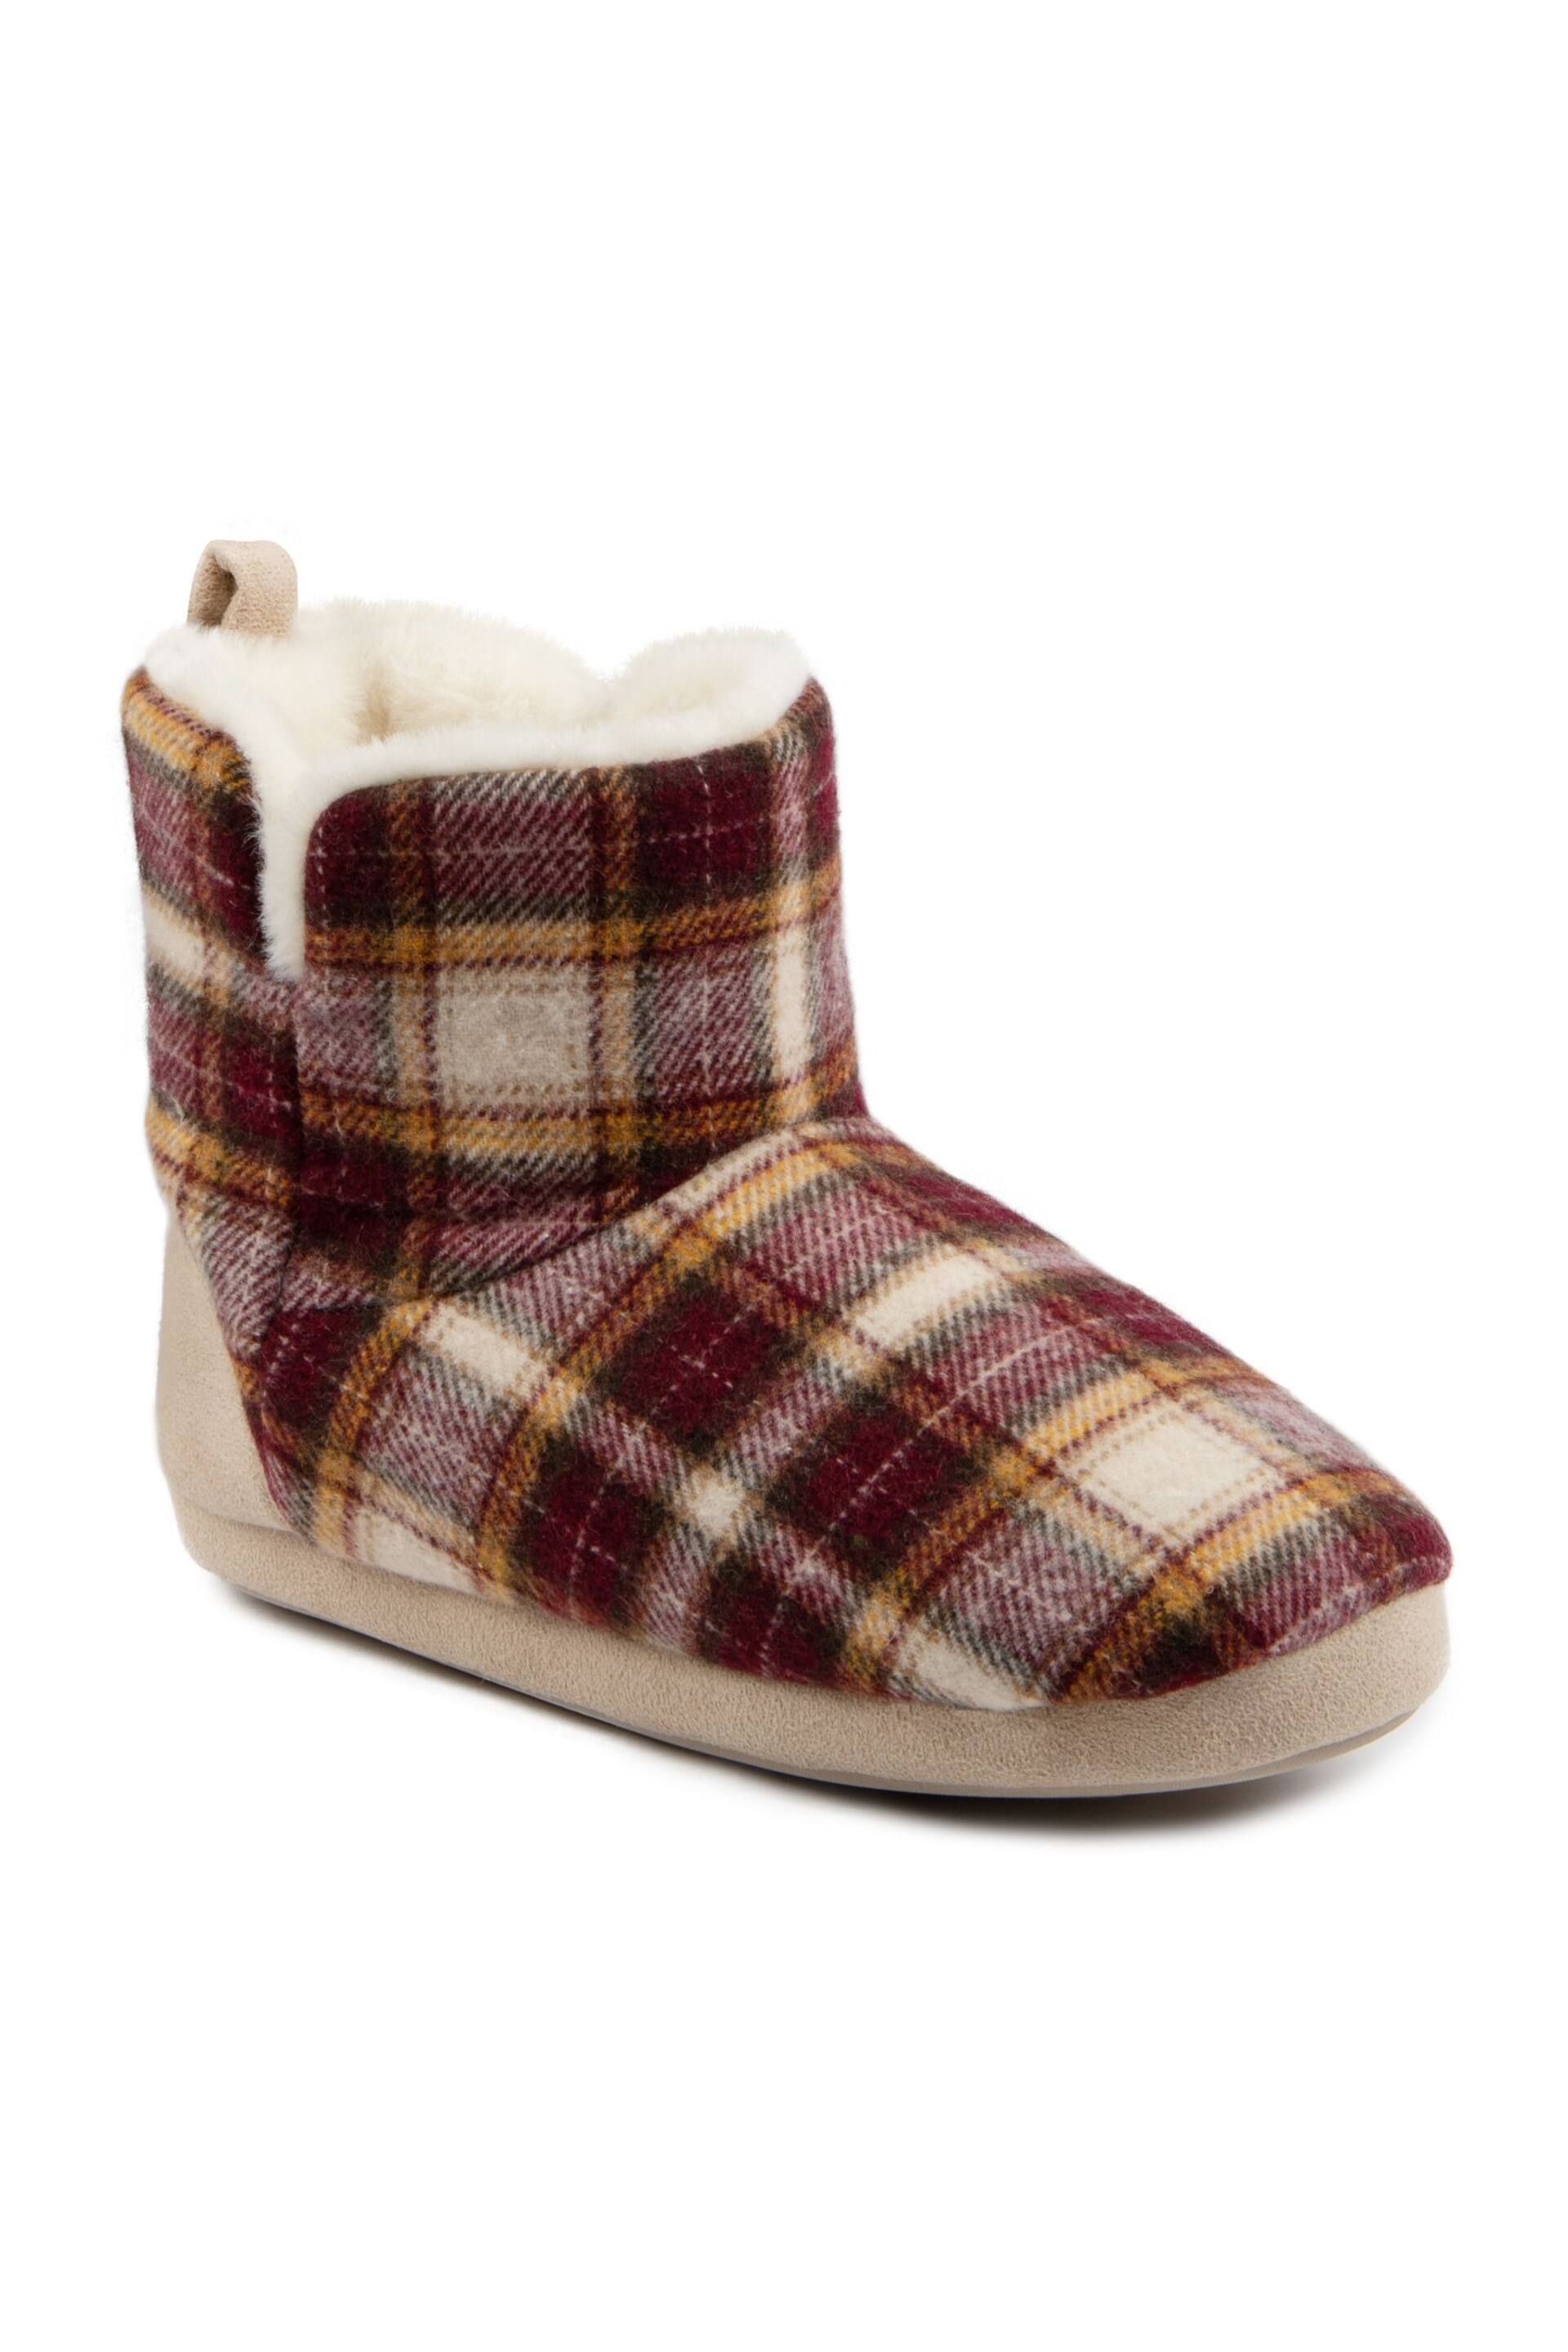 Totes Red Christmas Ladies Tartan Boot Slippers - Image 4 of 5